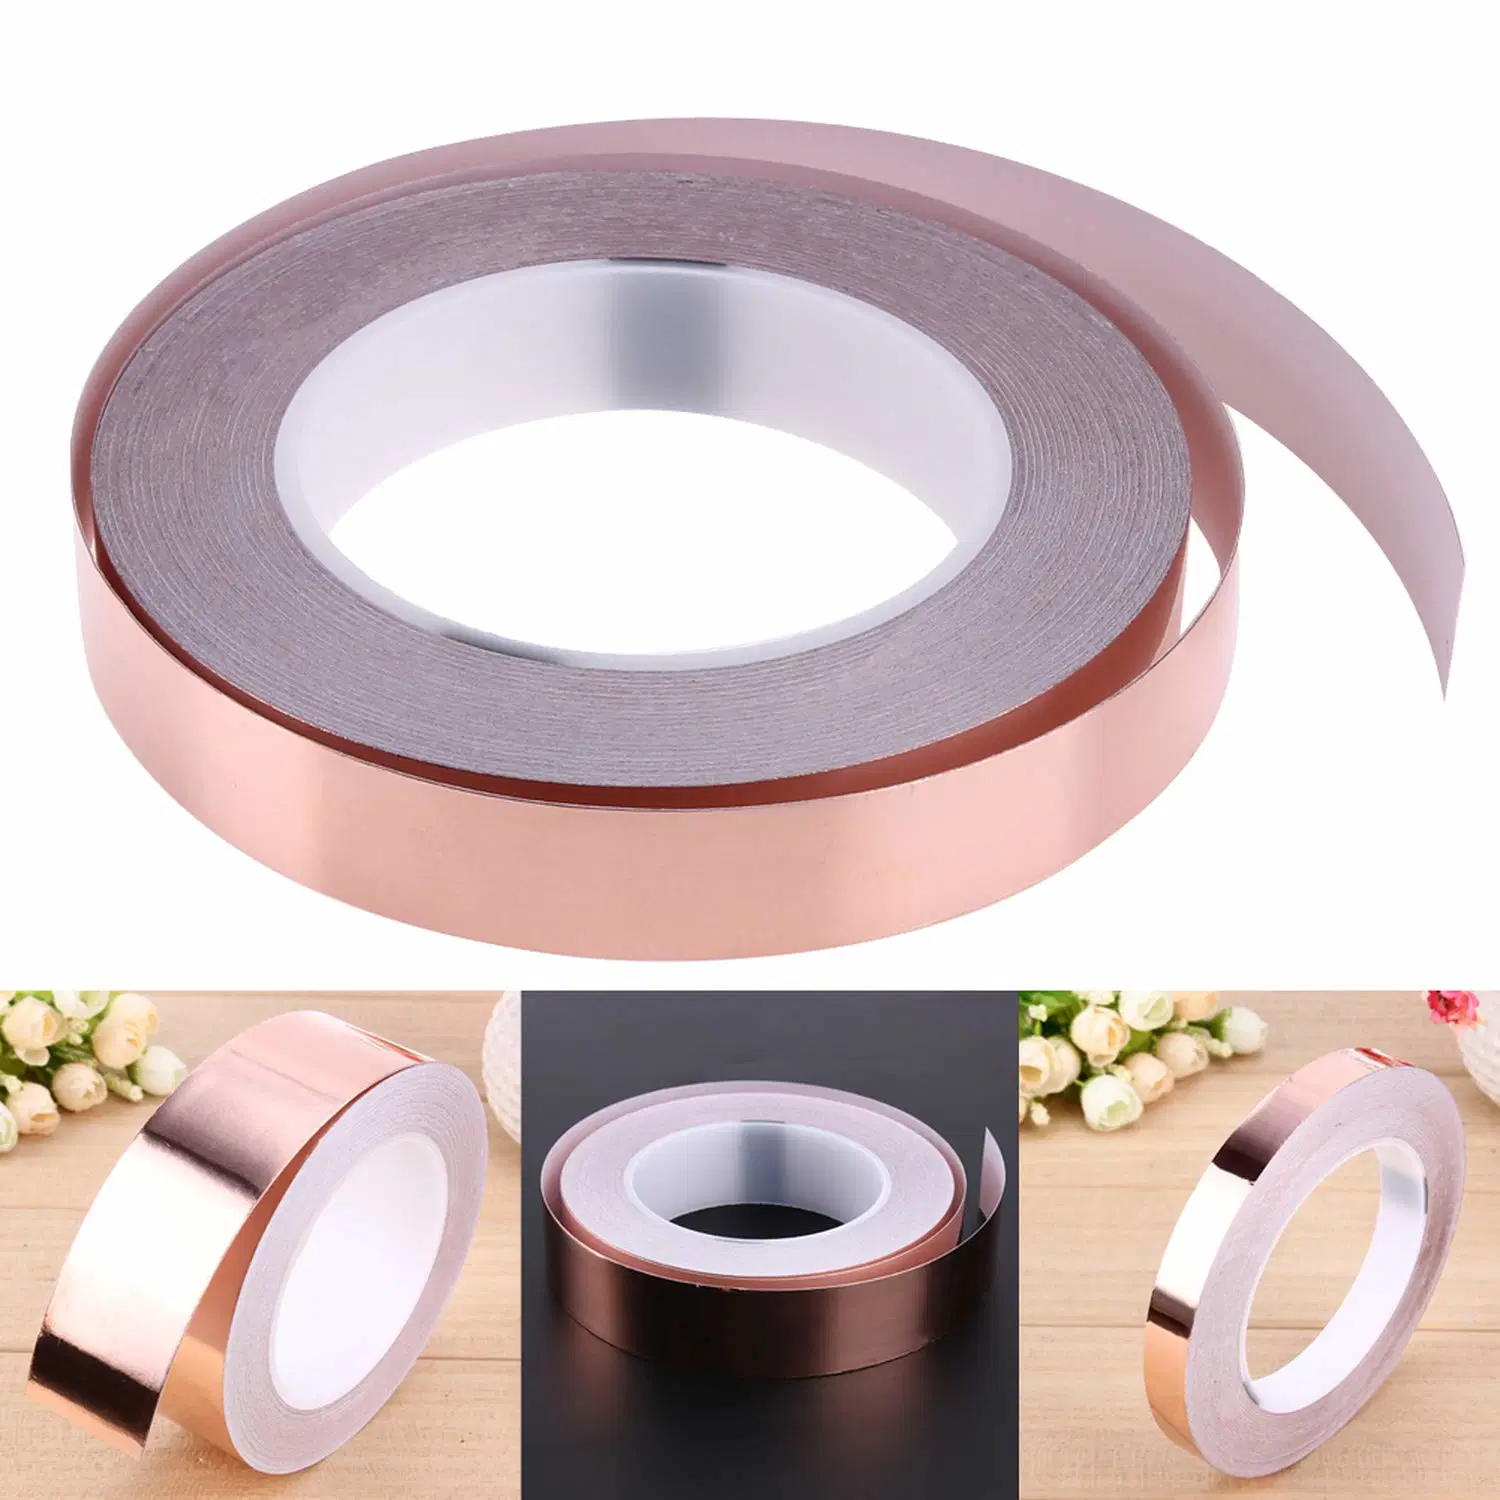 Copper Tape Single-Sided Conductive Adhesive Foil Copper Tape, Used for Electrical Maintenance, Anti-Plugging, Stained Glass